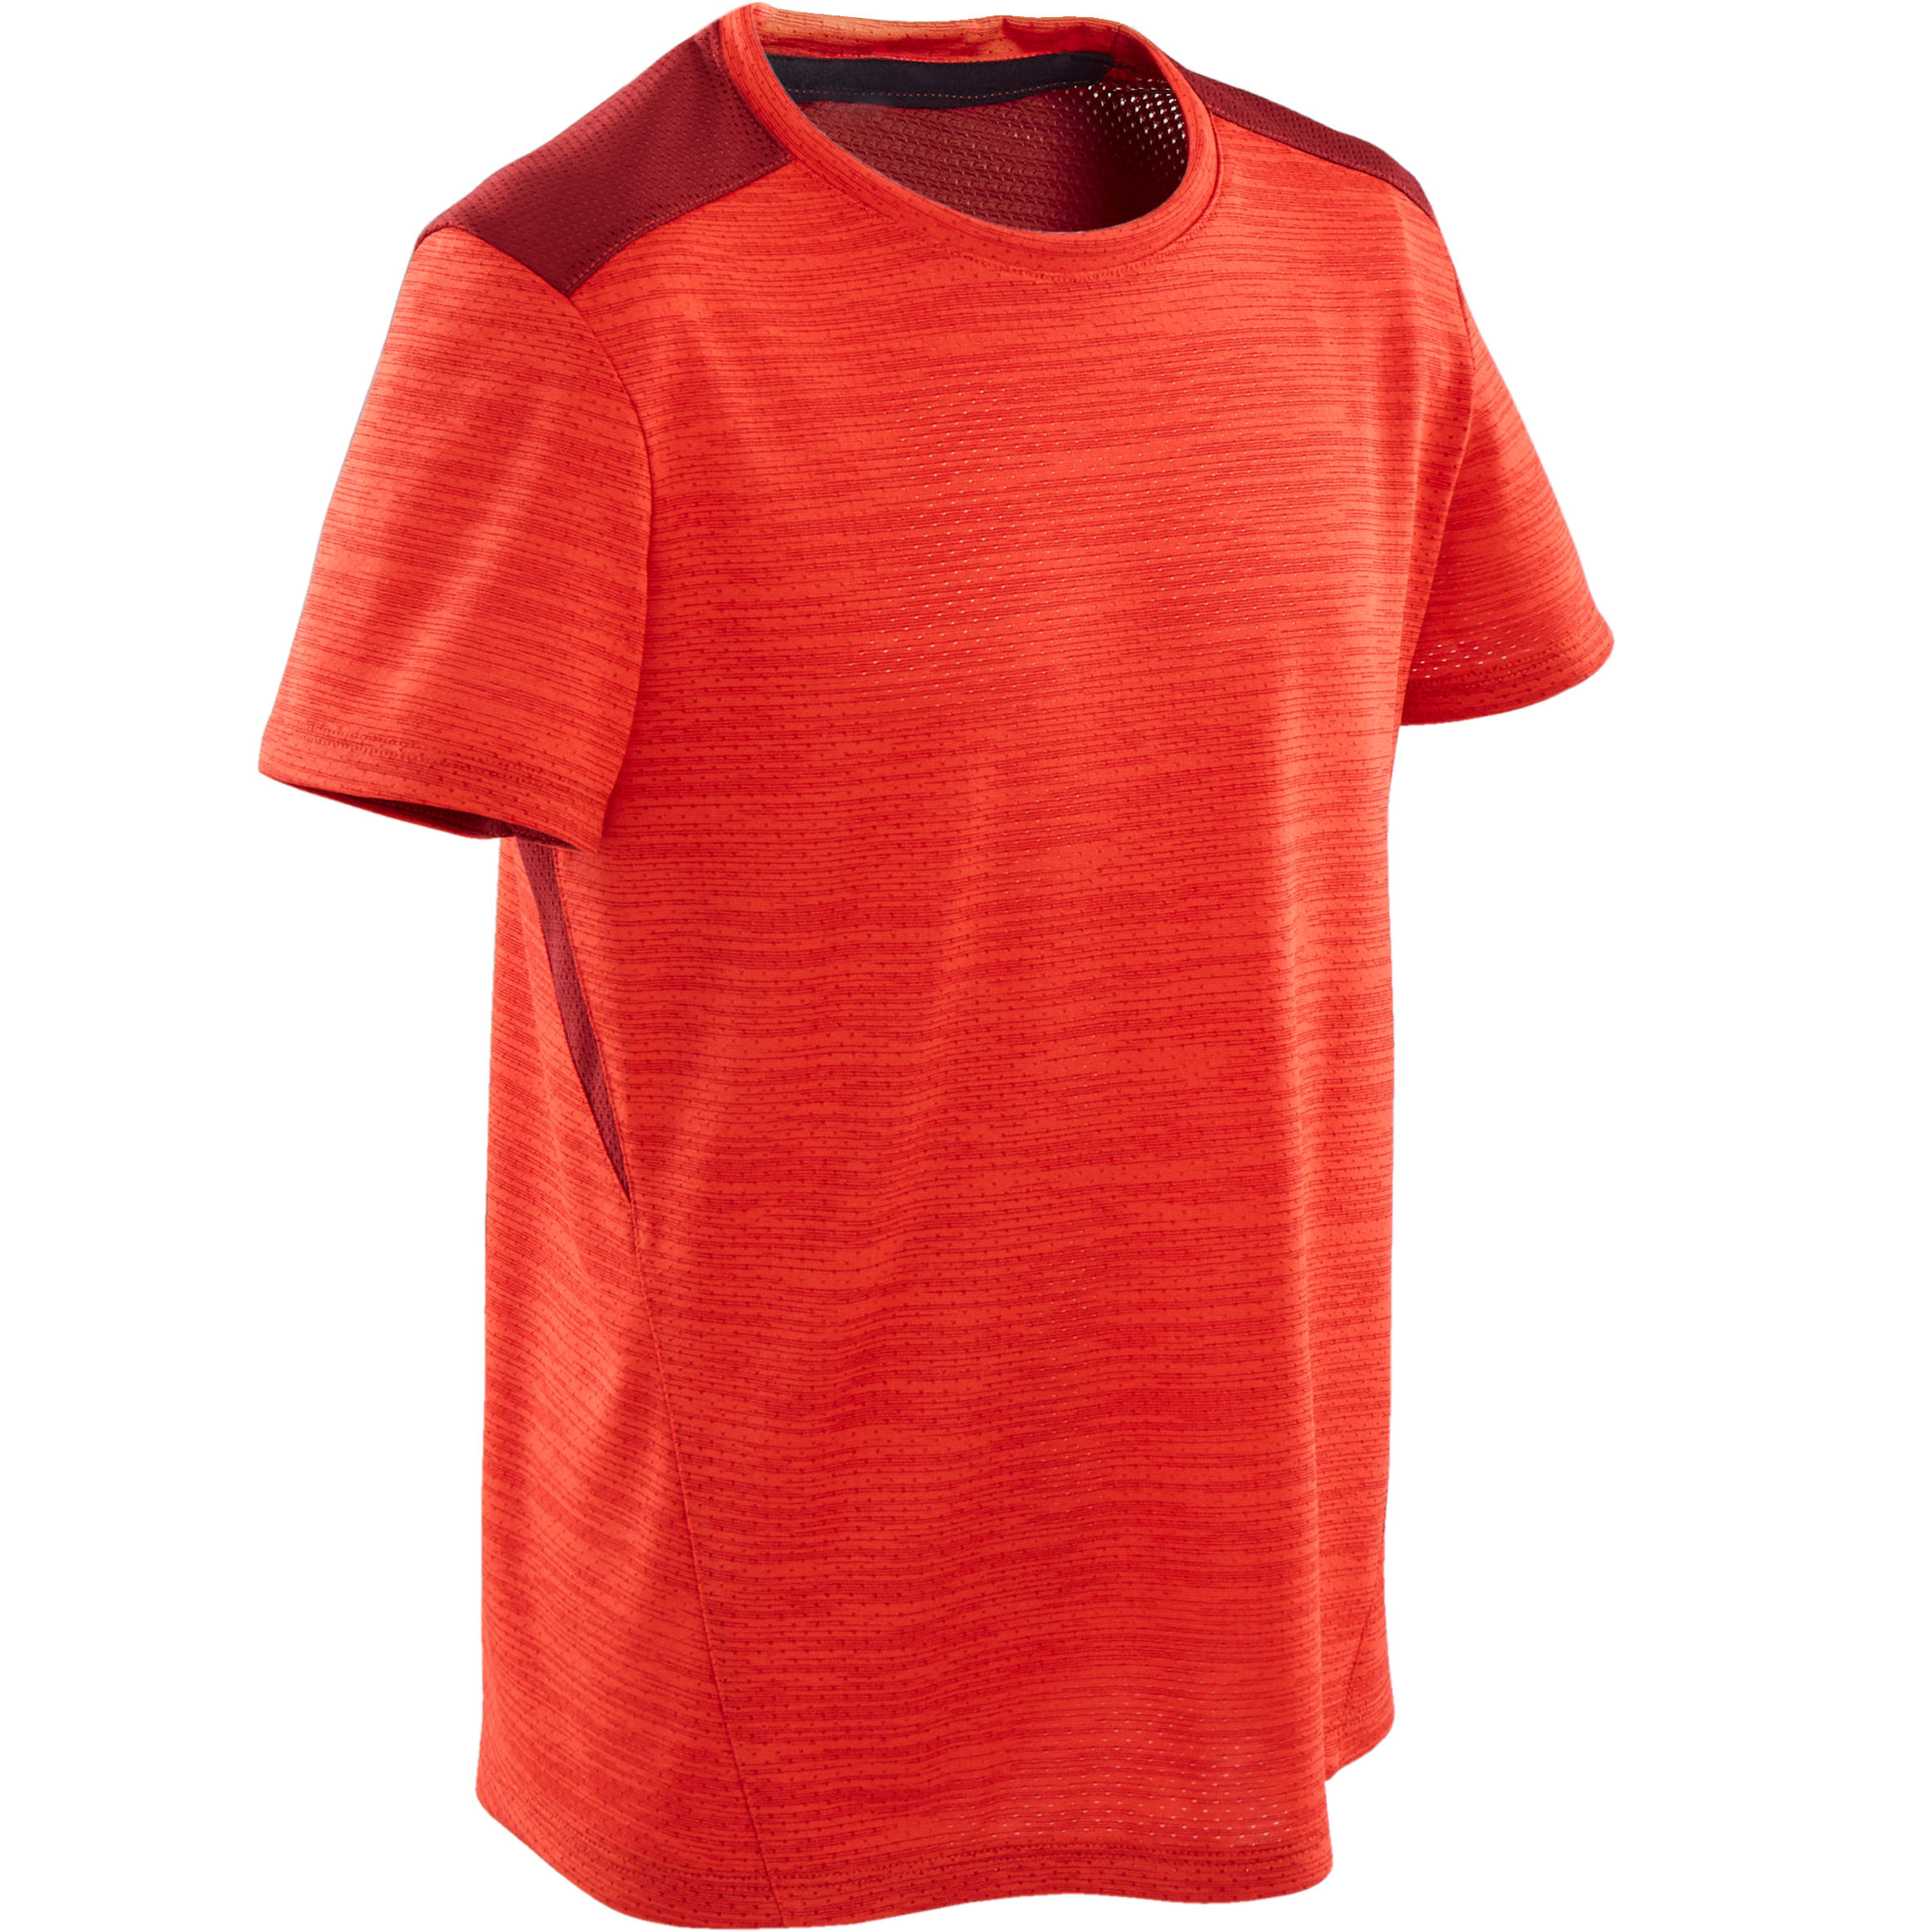 DOMYOS Boys' Breathable Synthetic Short-Sleeved Gym T-Shirt S500 - Red